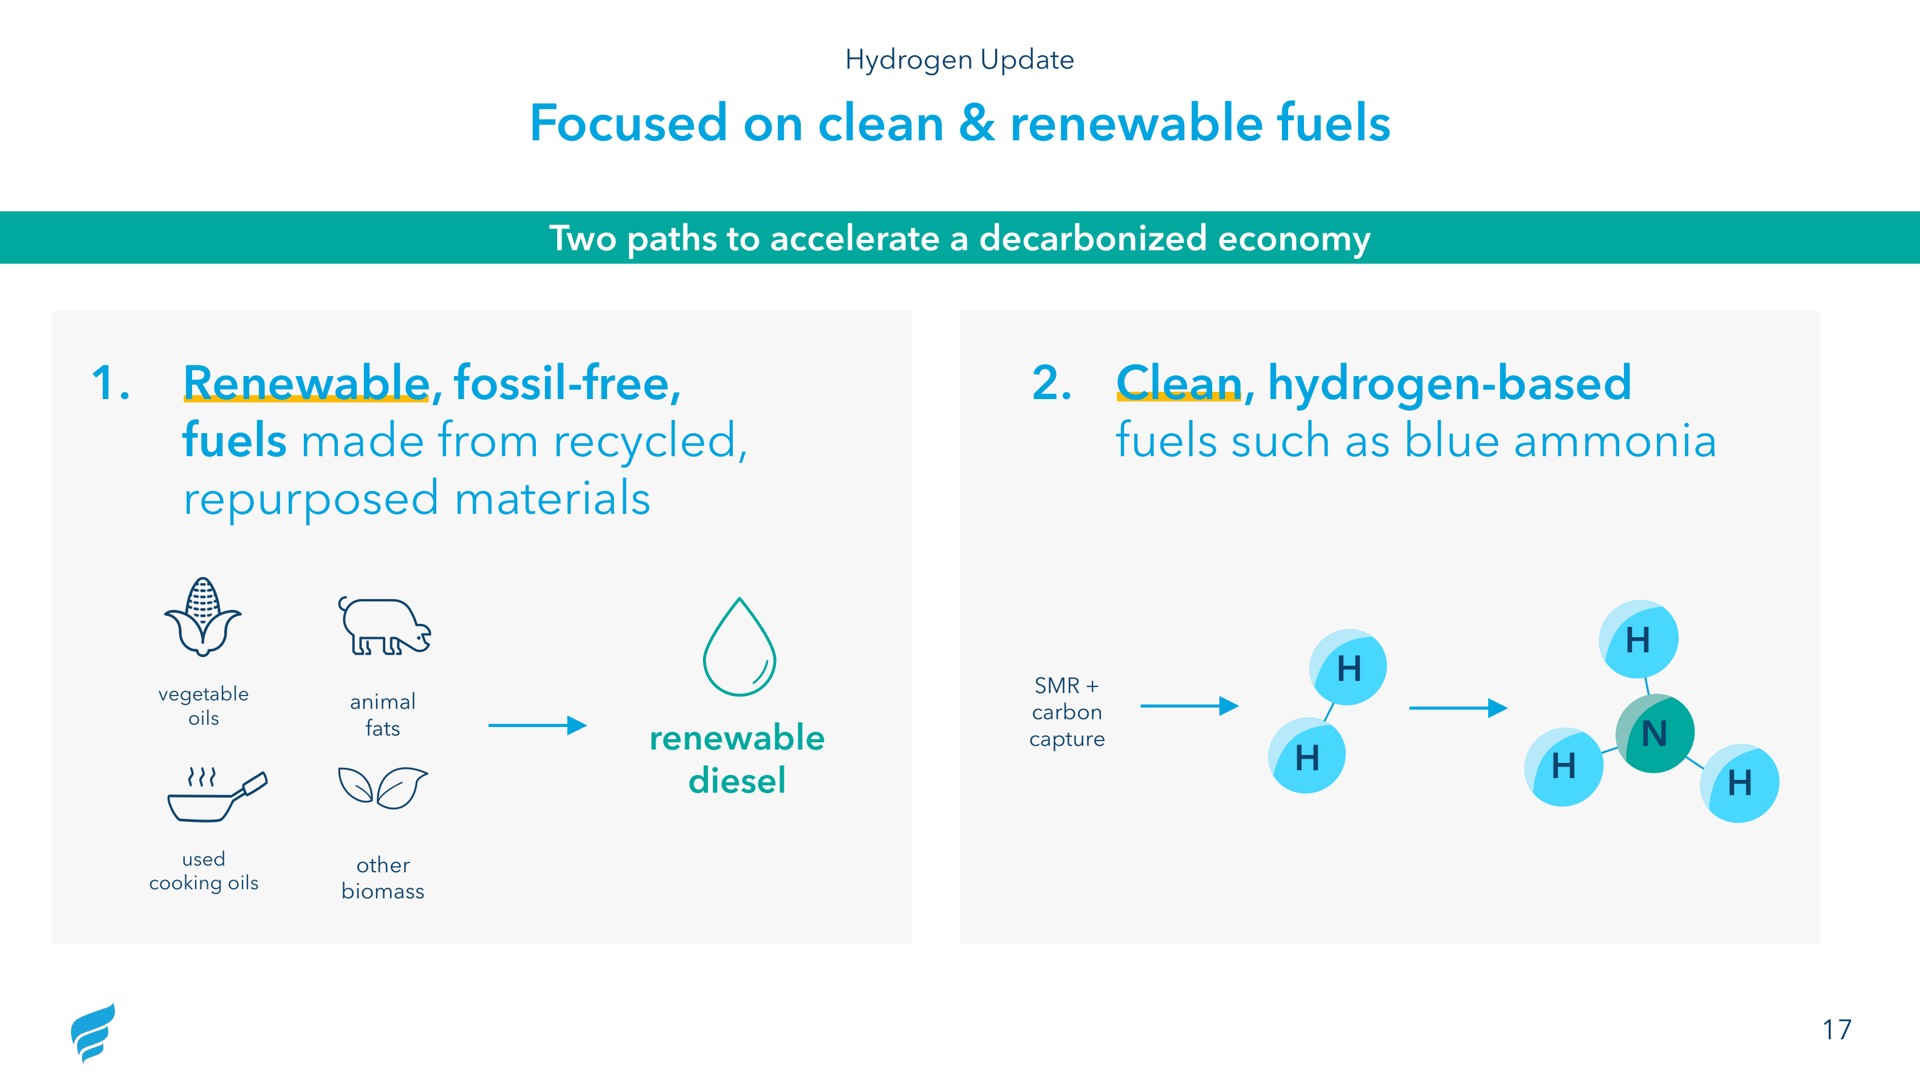 focused on clean renewable fuels renewable fossil free fuels made from recycled materials clean hydrogen based fuels such as blue ammonia | NewFortress Energy